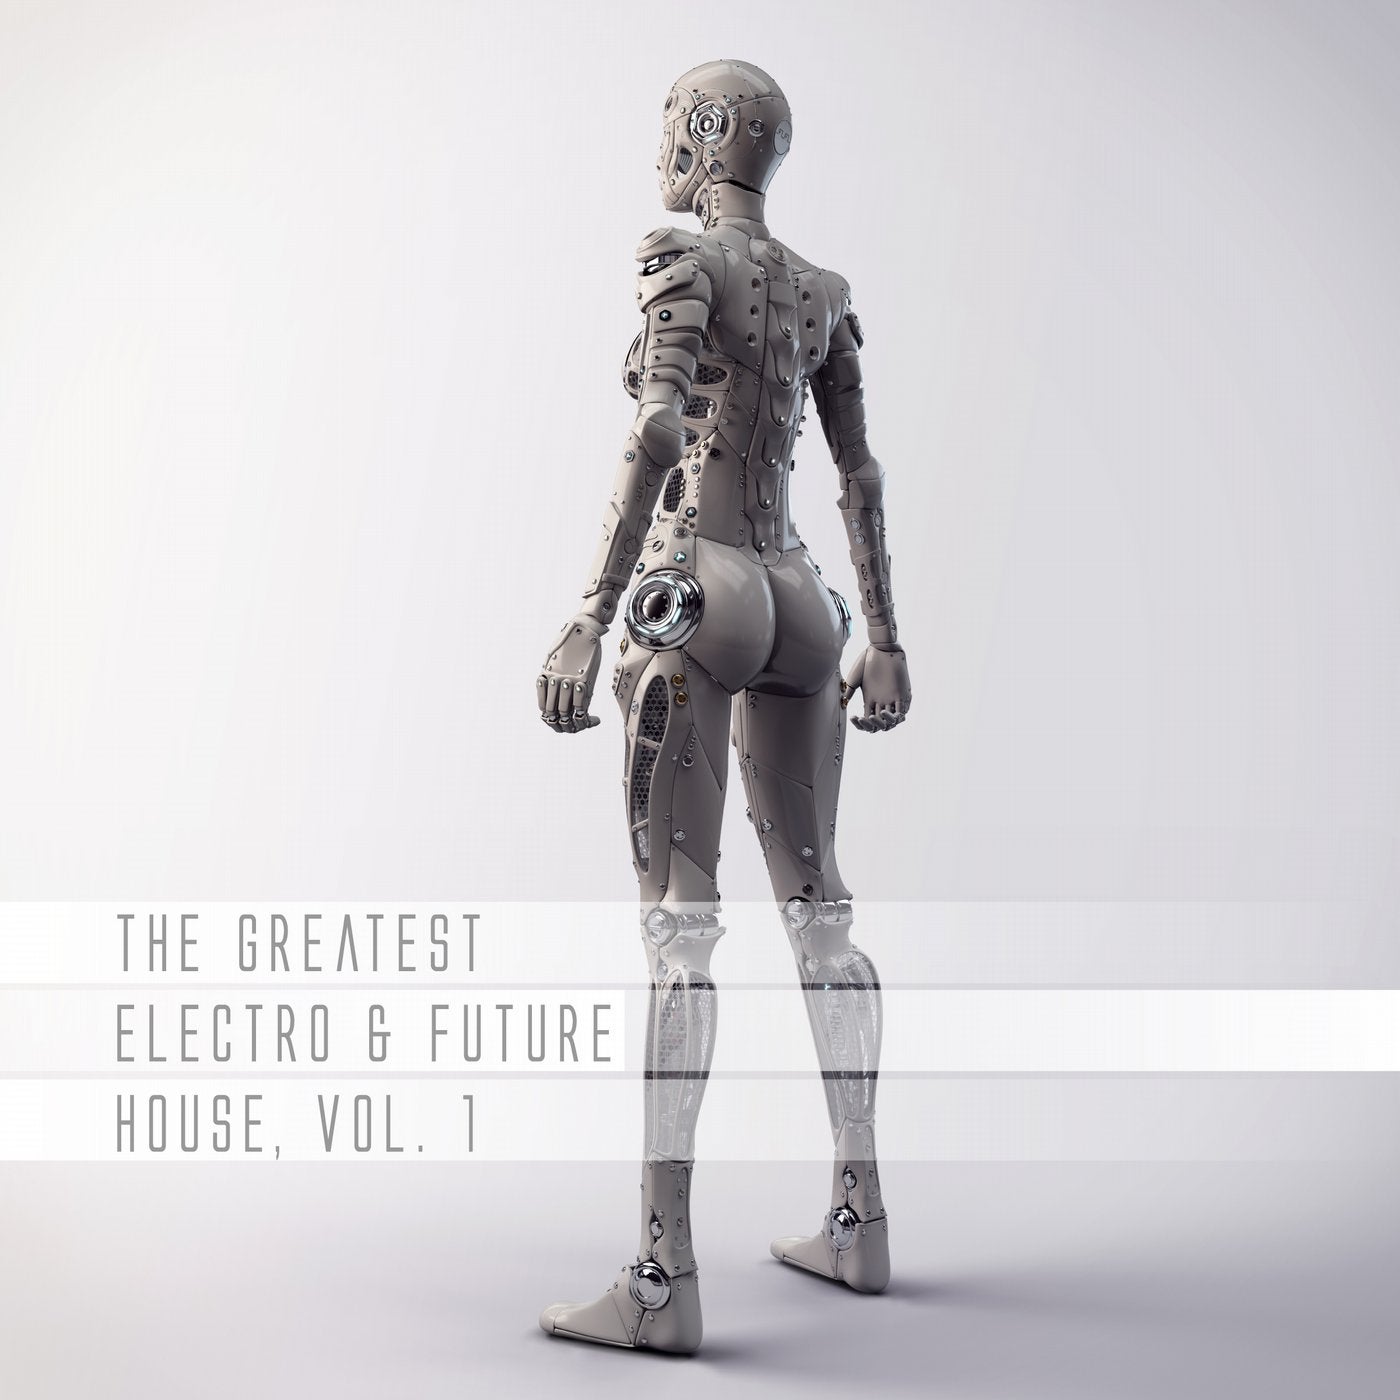 The Greatest Electro & Future House, Vol. 1